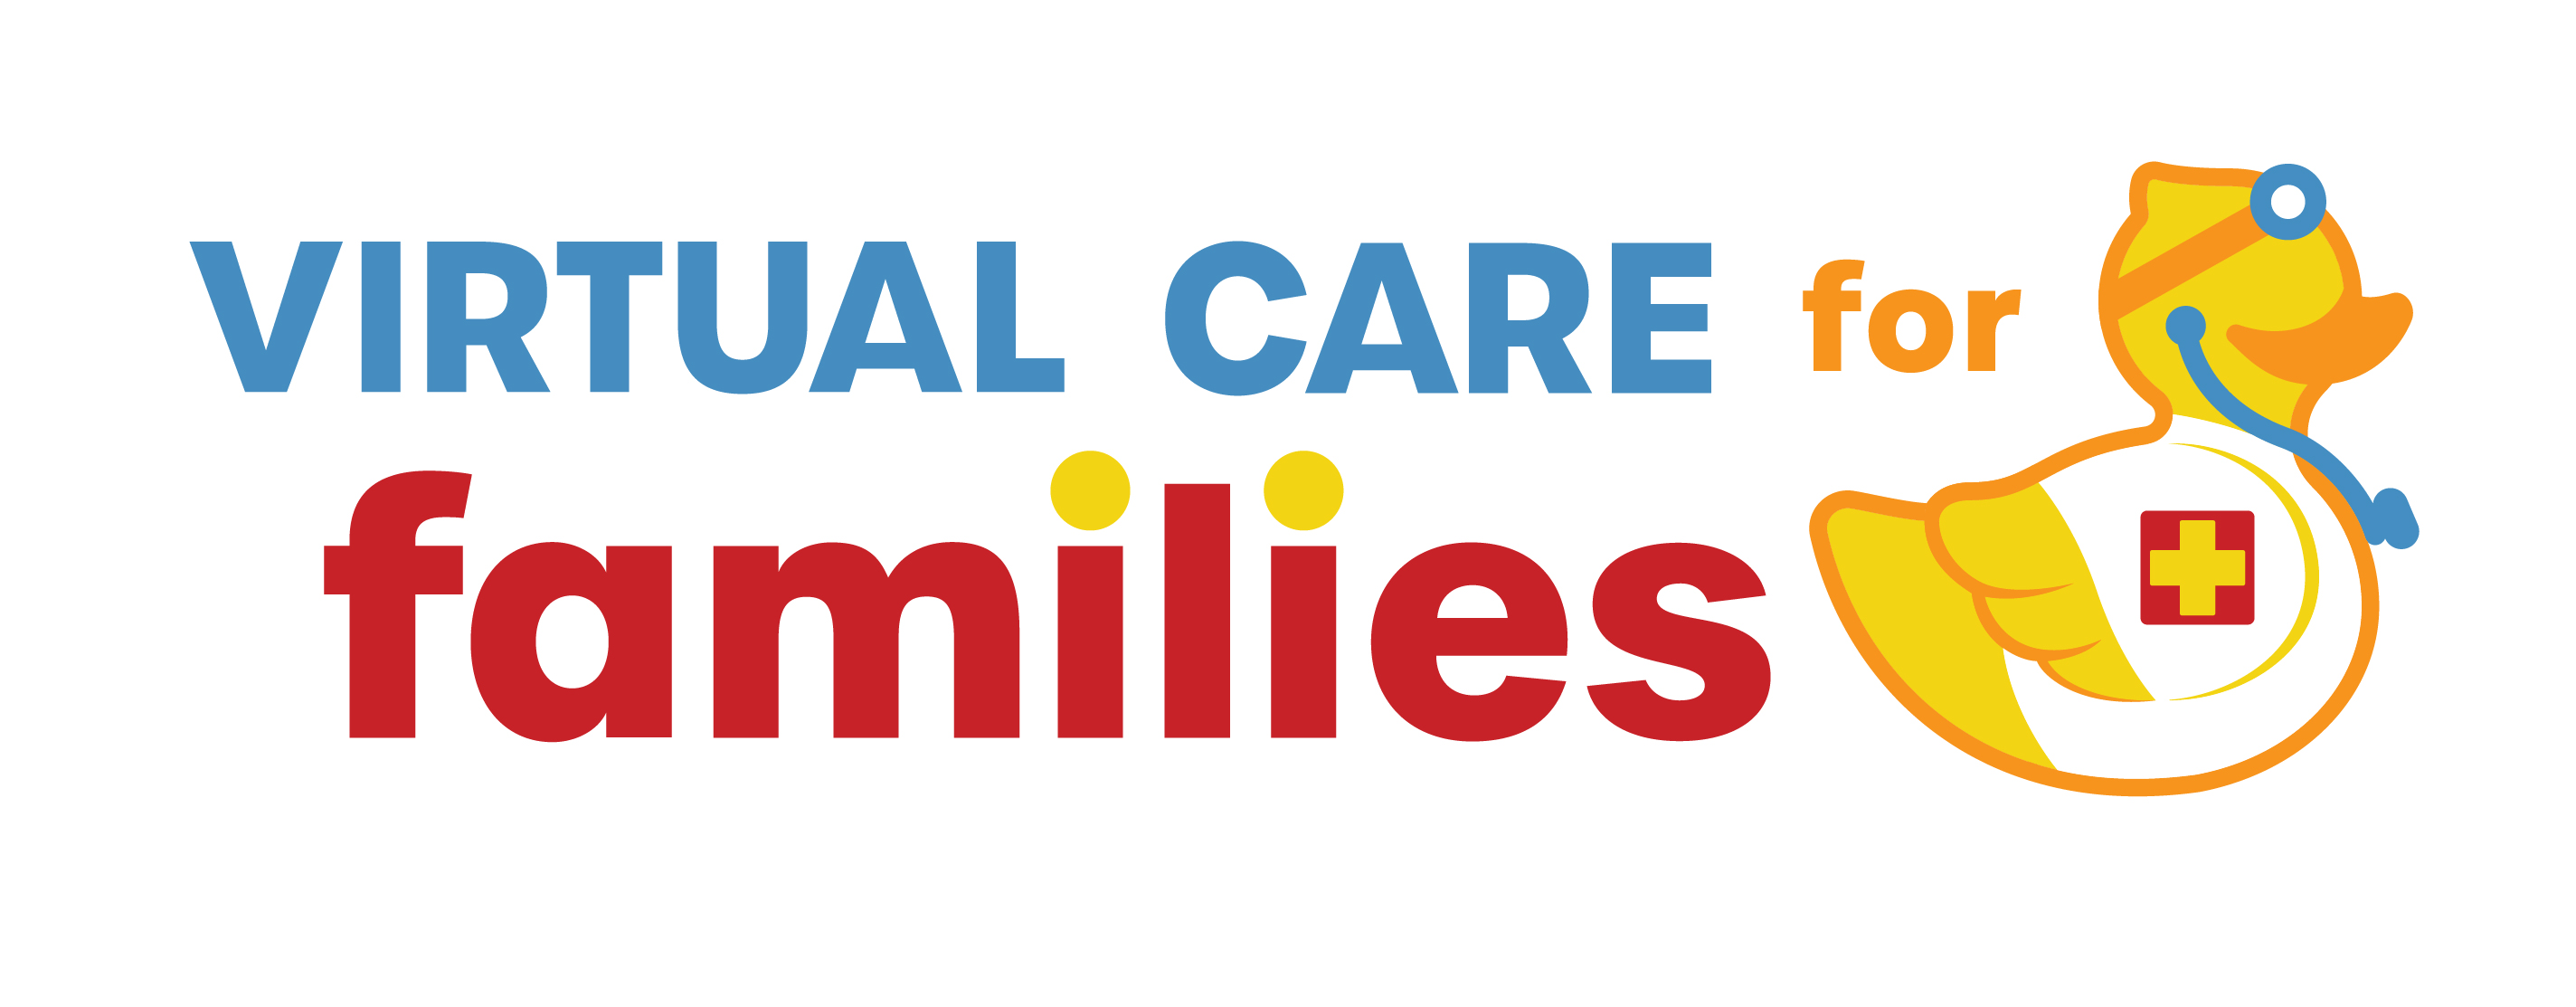 Urgent Care for Kids  - Virtual Care for Families Logo